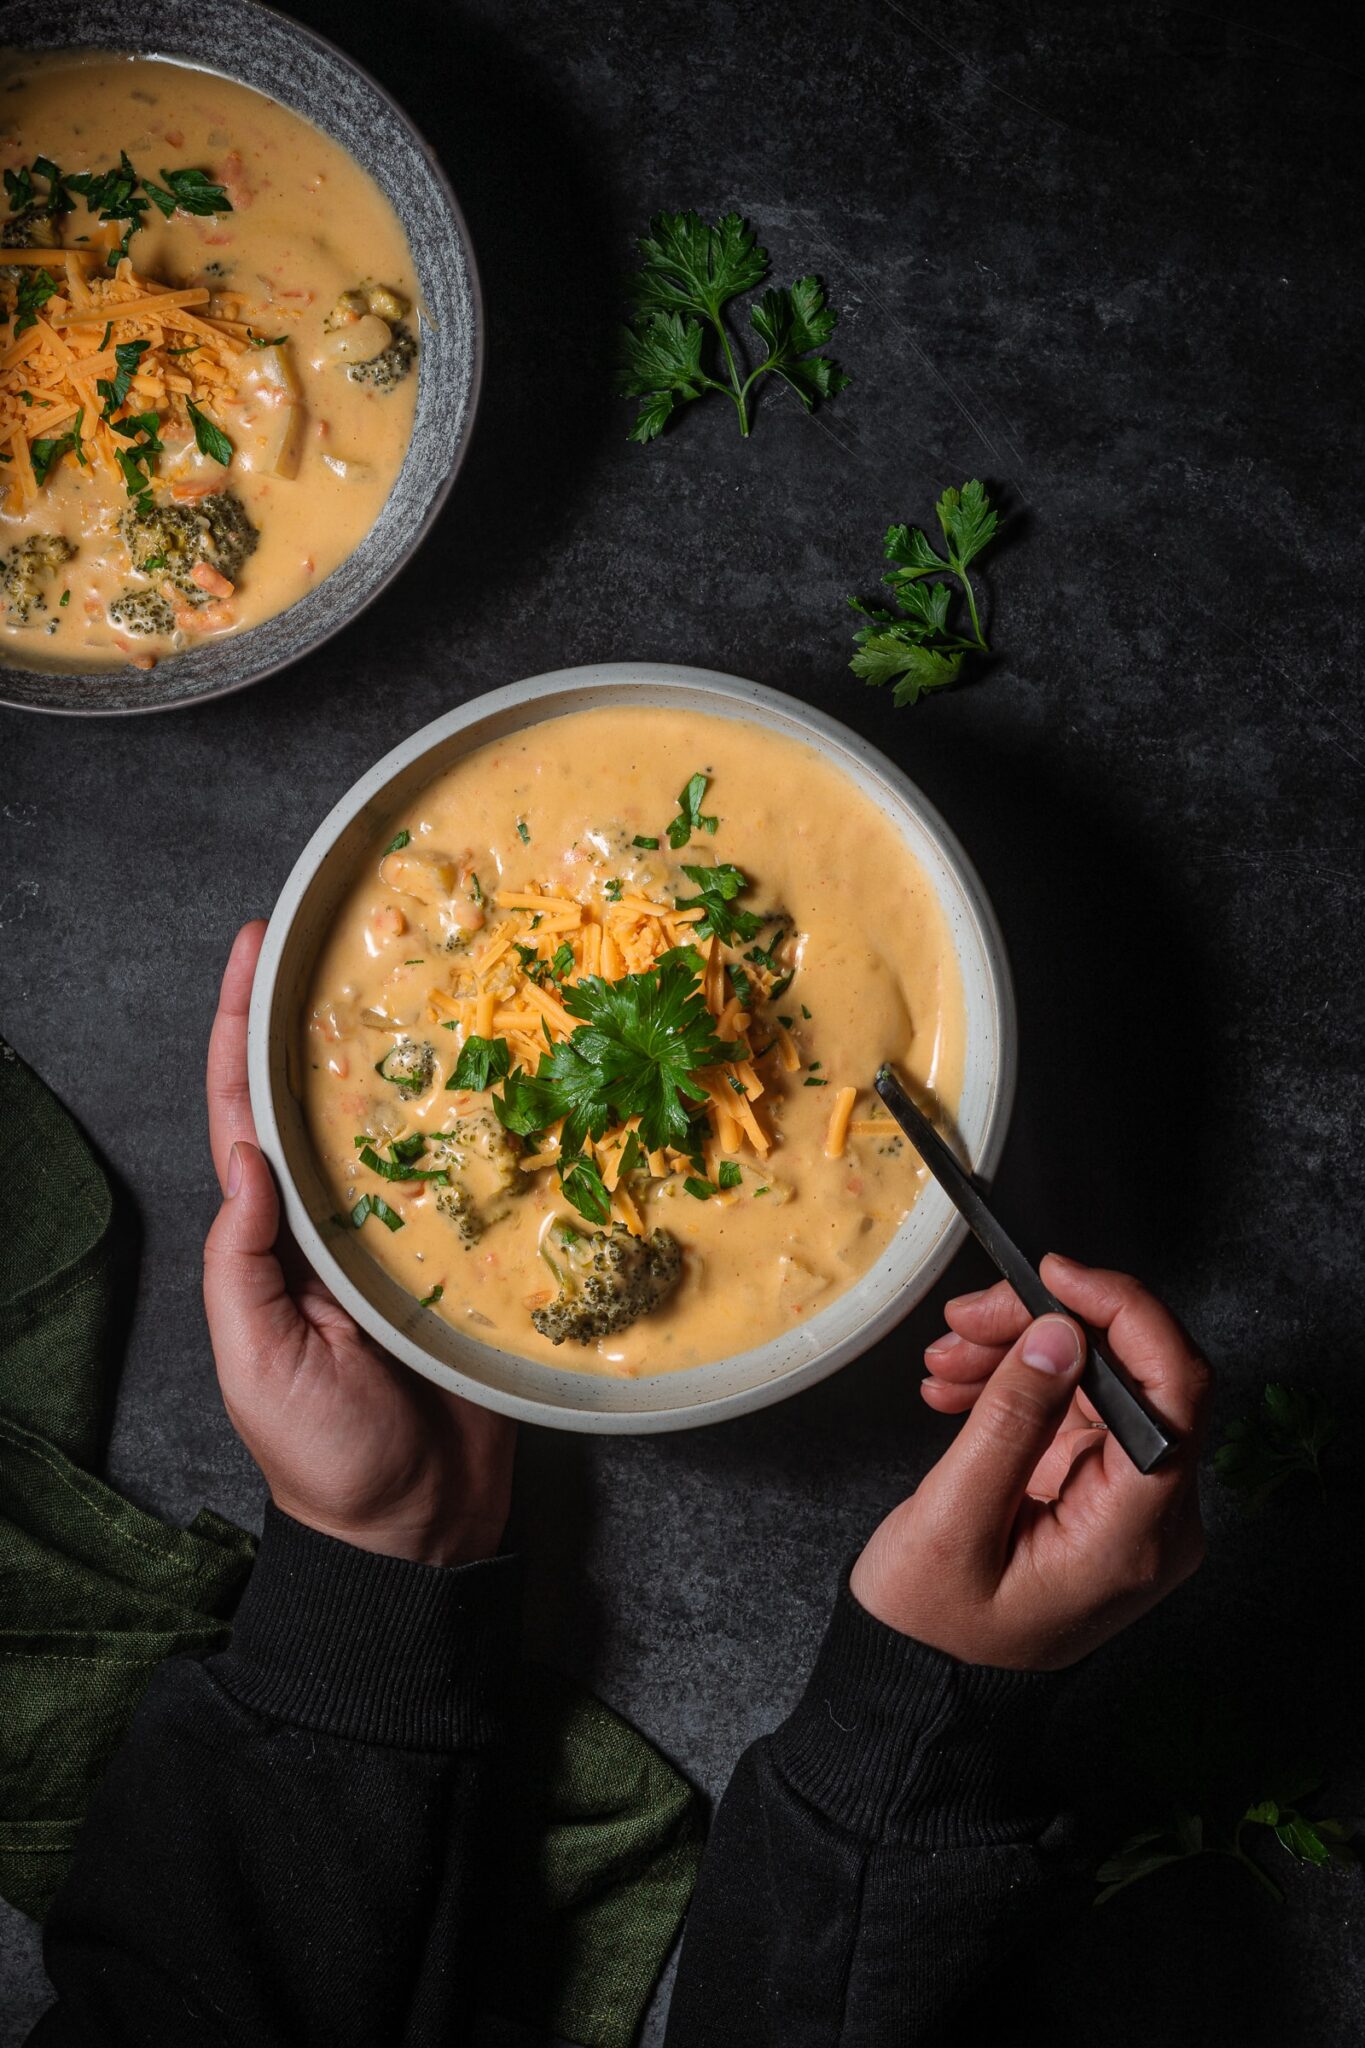 Creamy, vegan broccoli cheddar soup in a shallow bowl topped with vegan cheese and parsley.